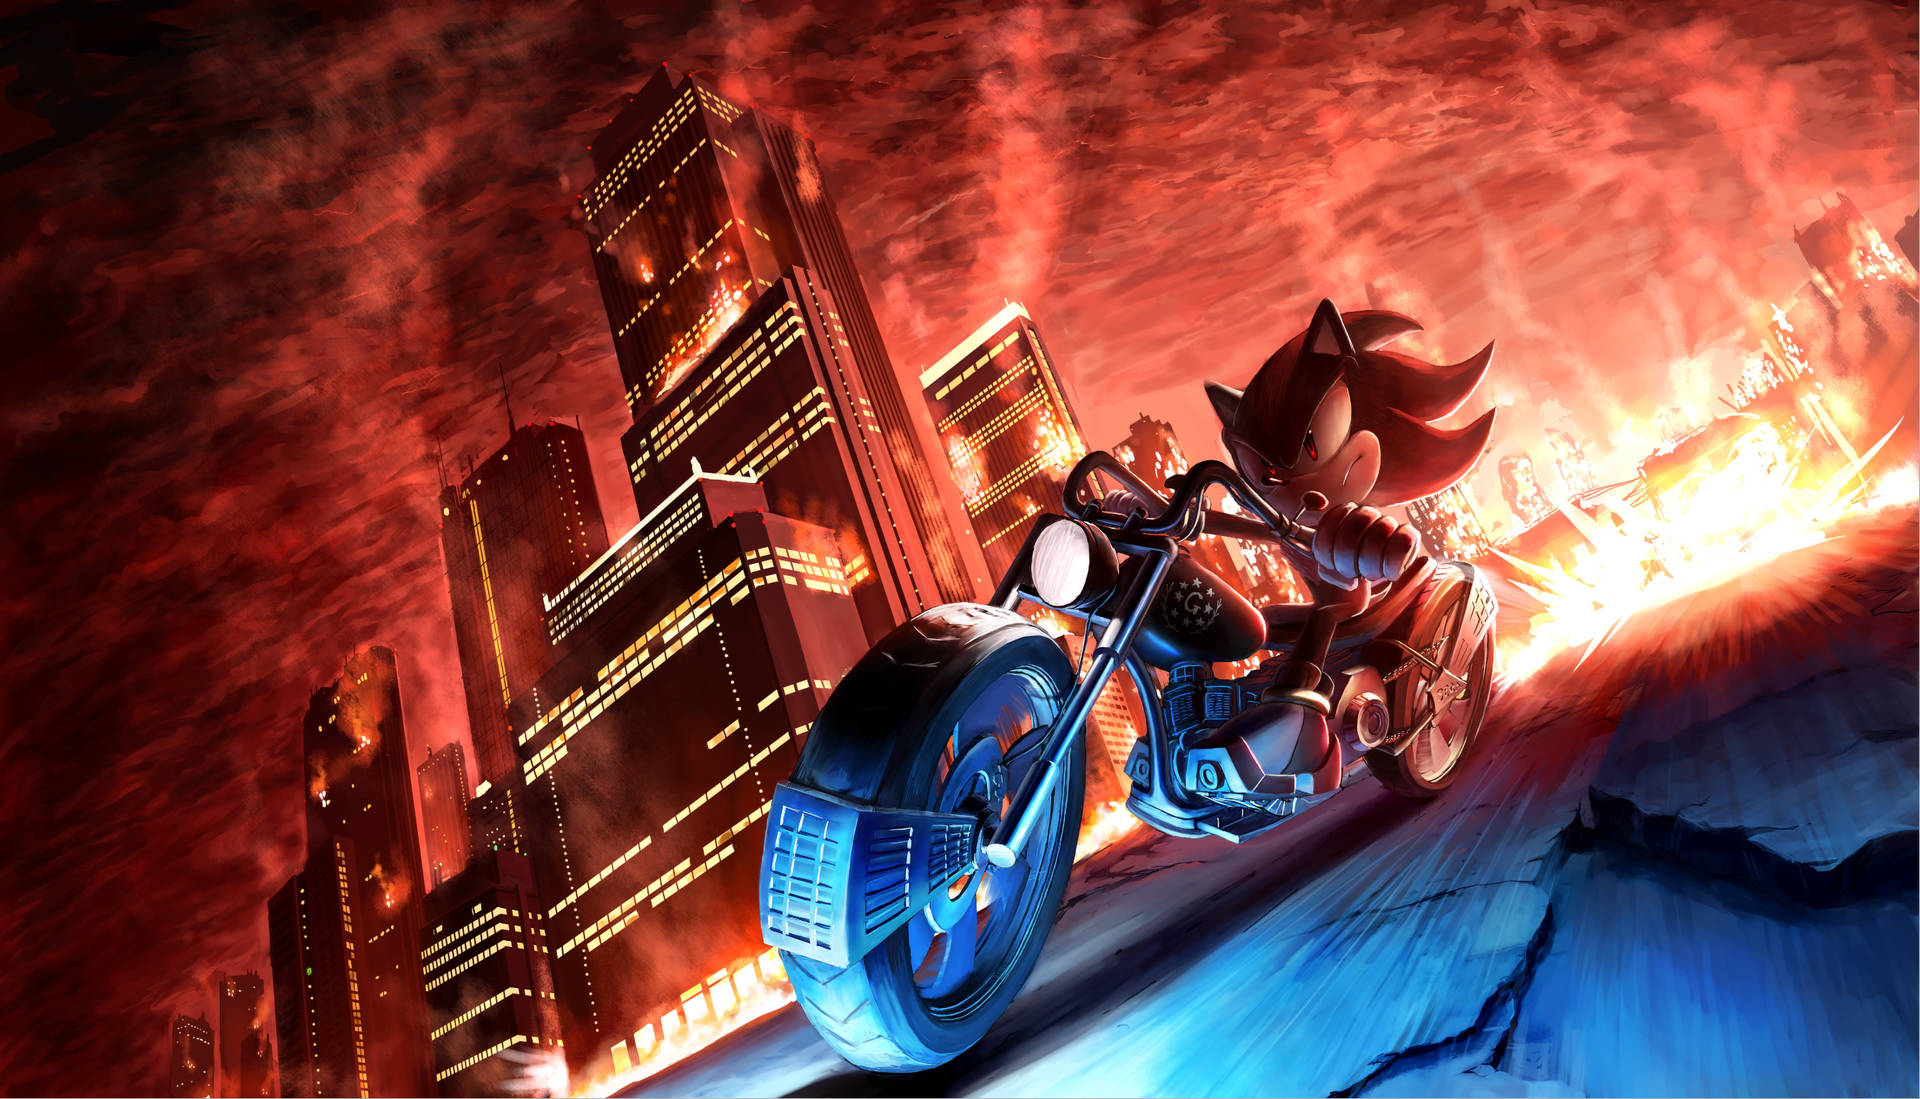 Evil Sonic The Hedgehog Riding A Motorcycle Picture